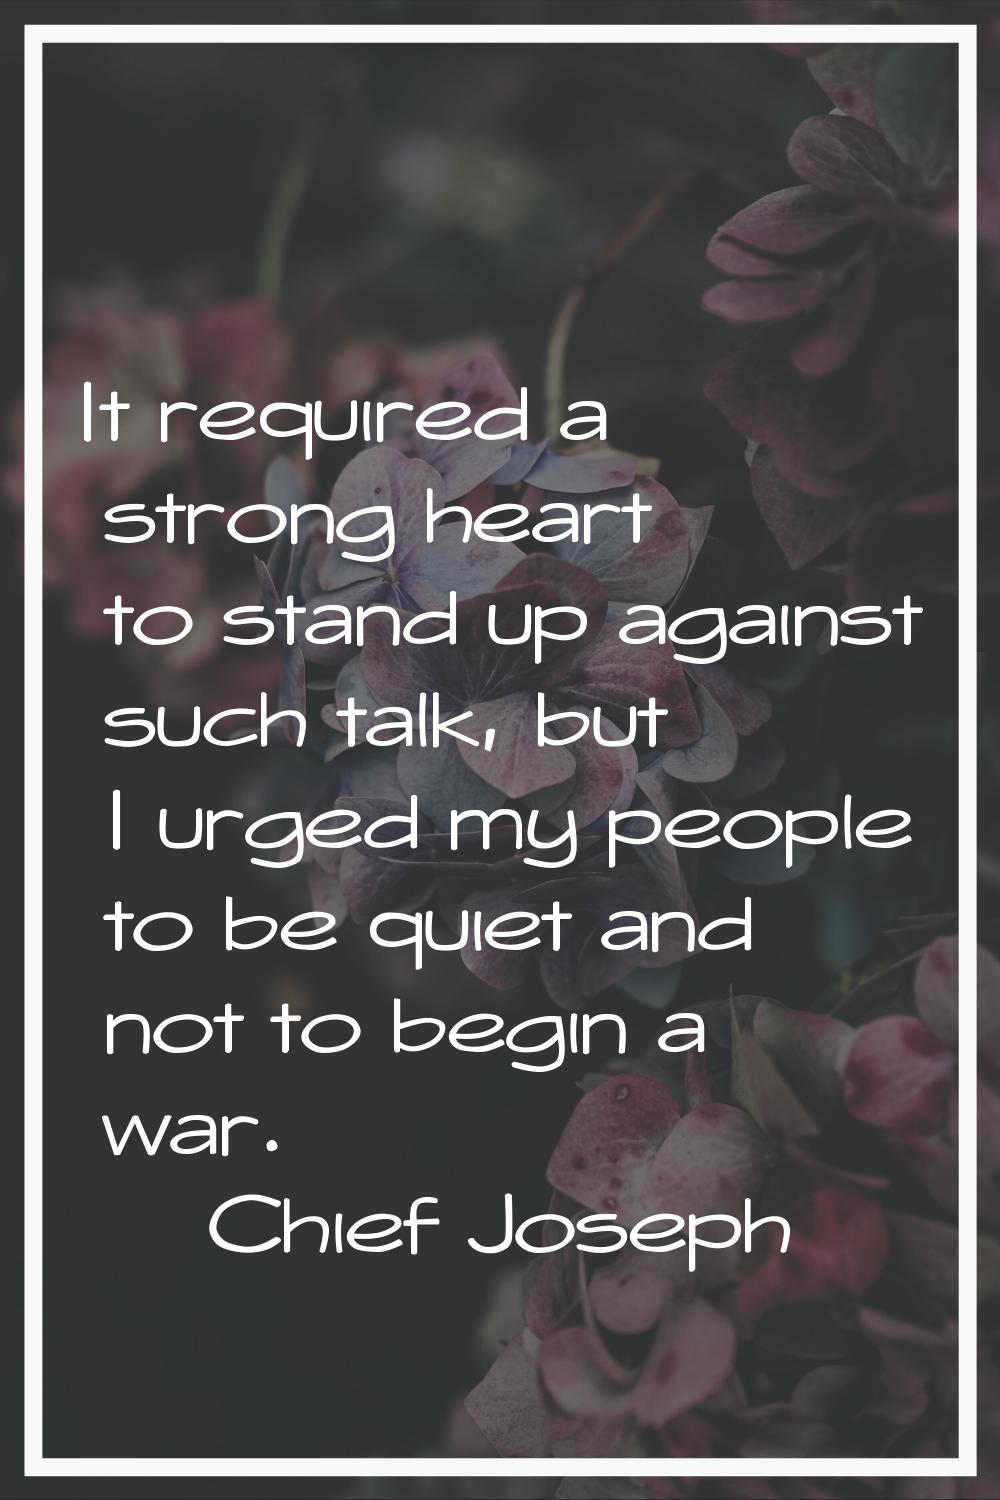 It required a strong heart to stand up against such talk, but I urged my people to be quiet and not